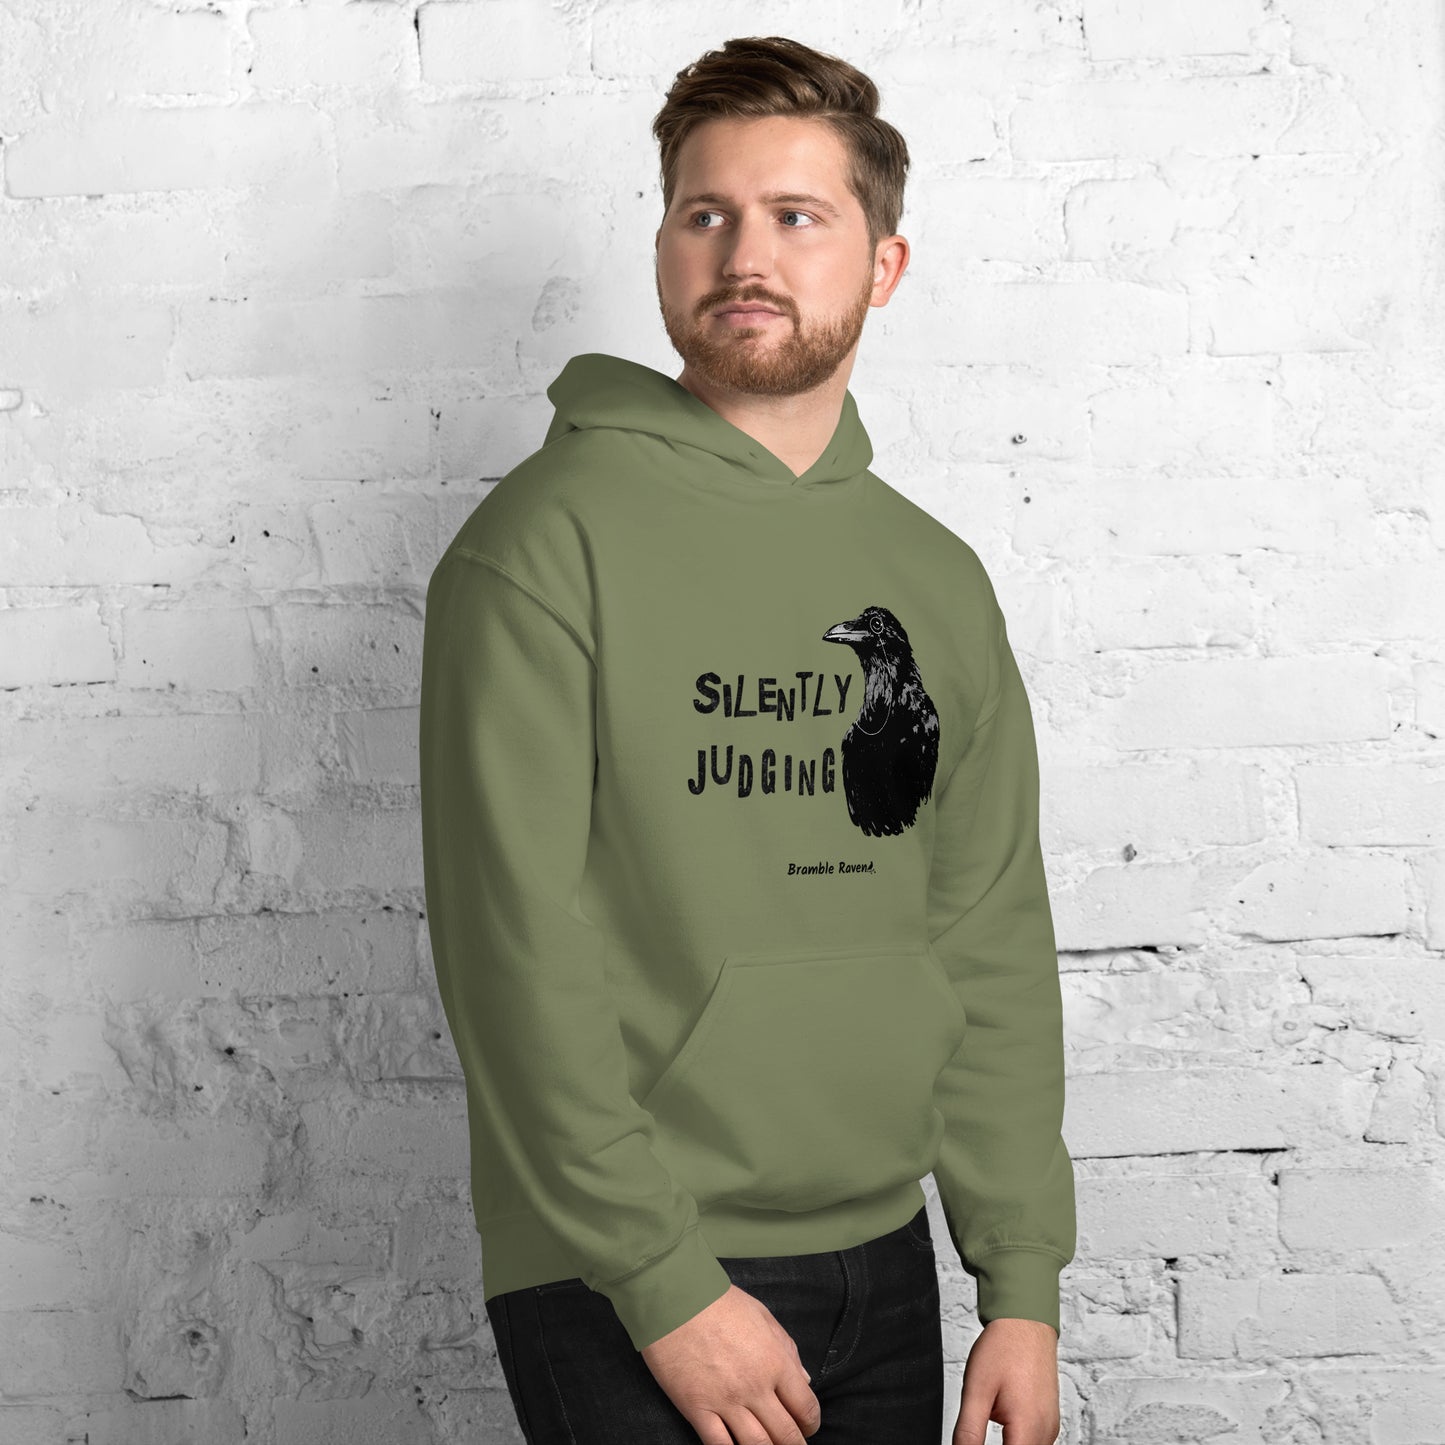 Unisex military green colored hoodie with horizontal design of silently judging text by black crow wearing a monocle.  Design on the front of hoodie. Features double-lined hood and front pouch pocket. Shown on male model.